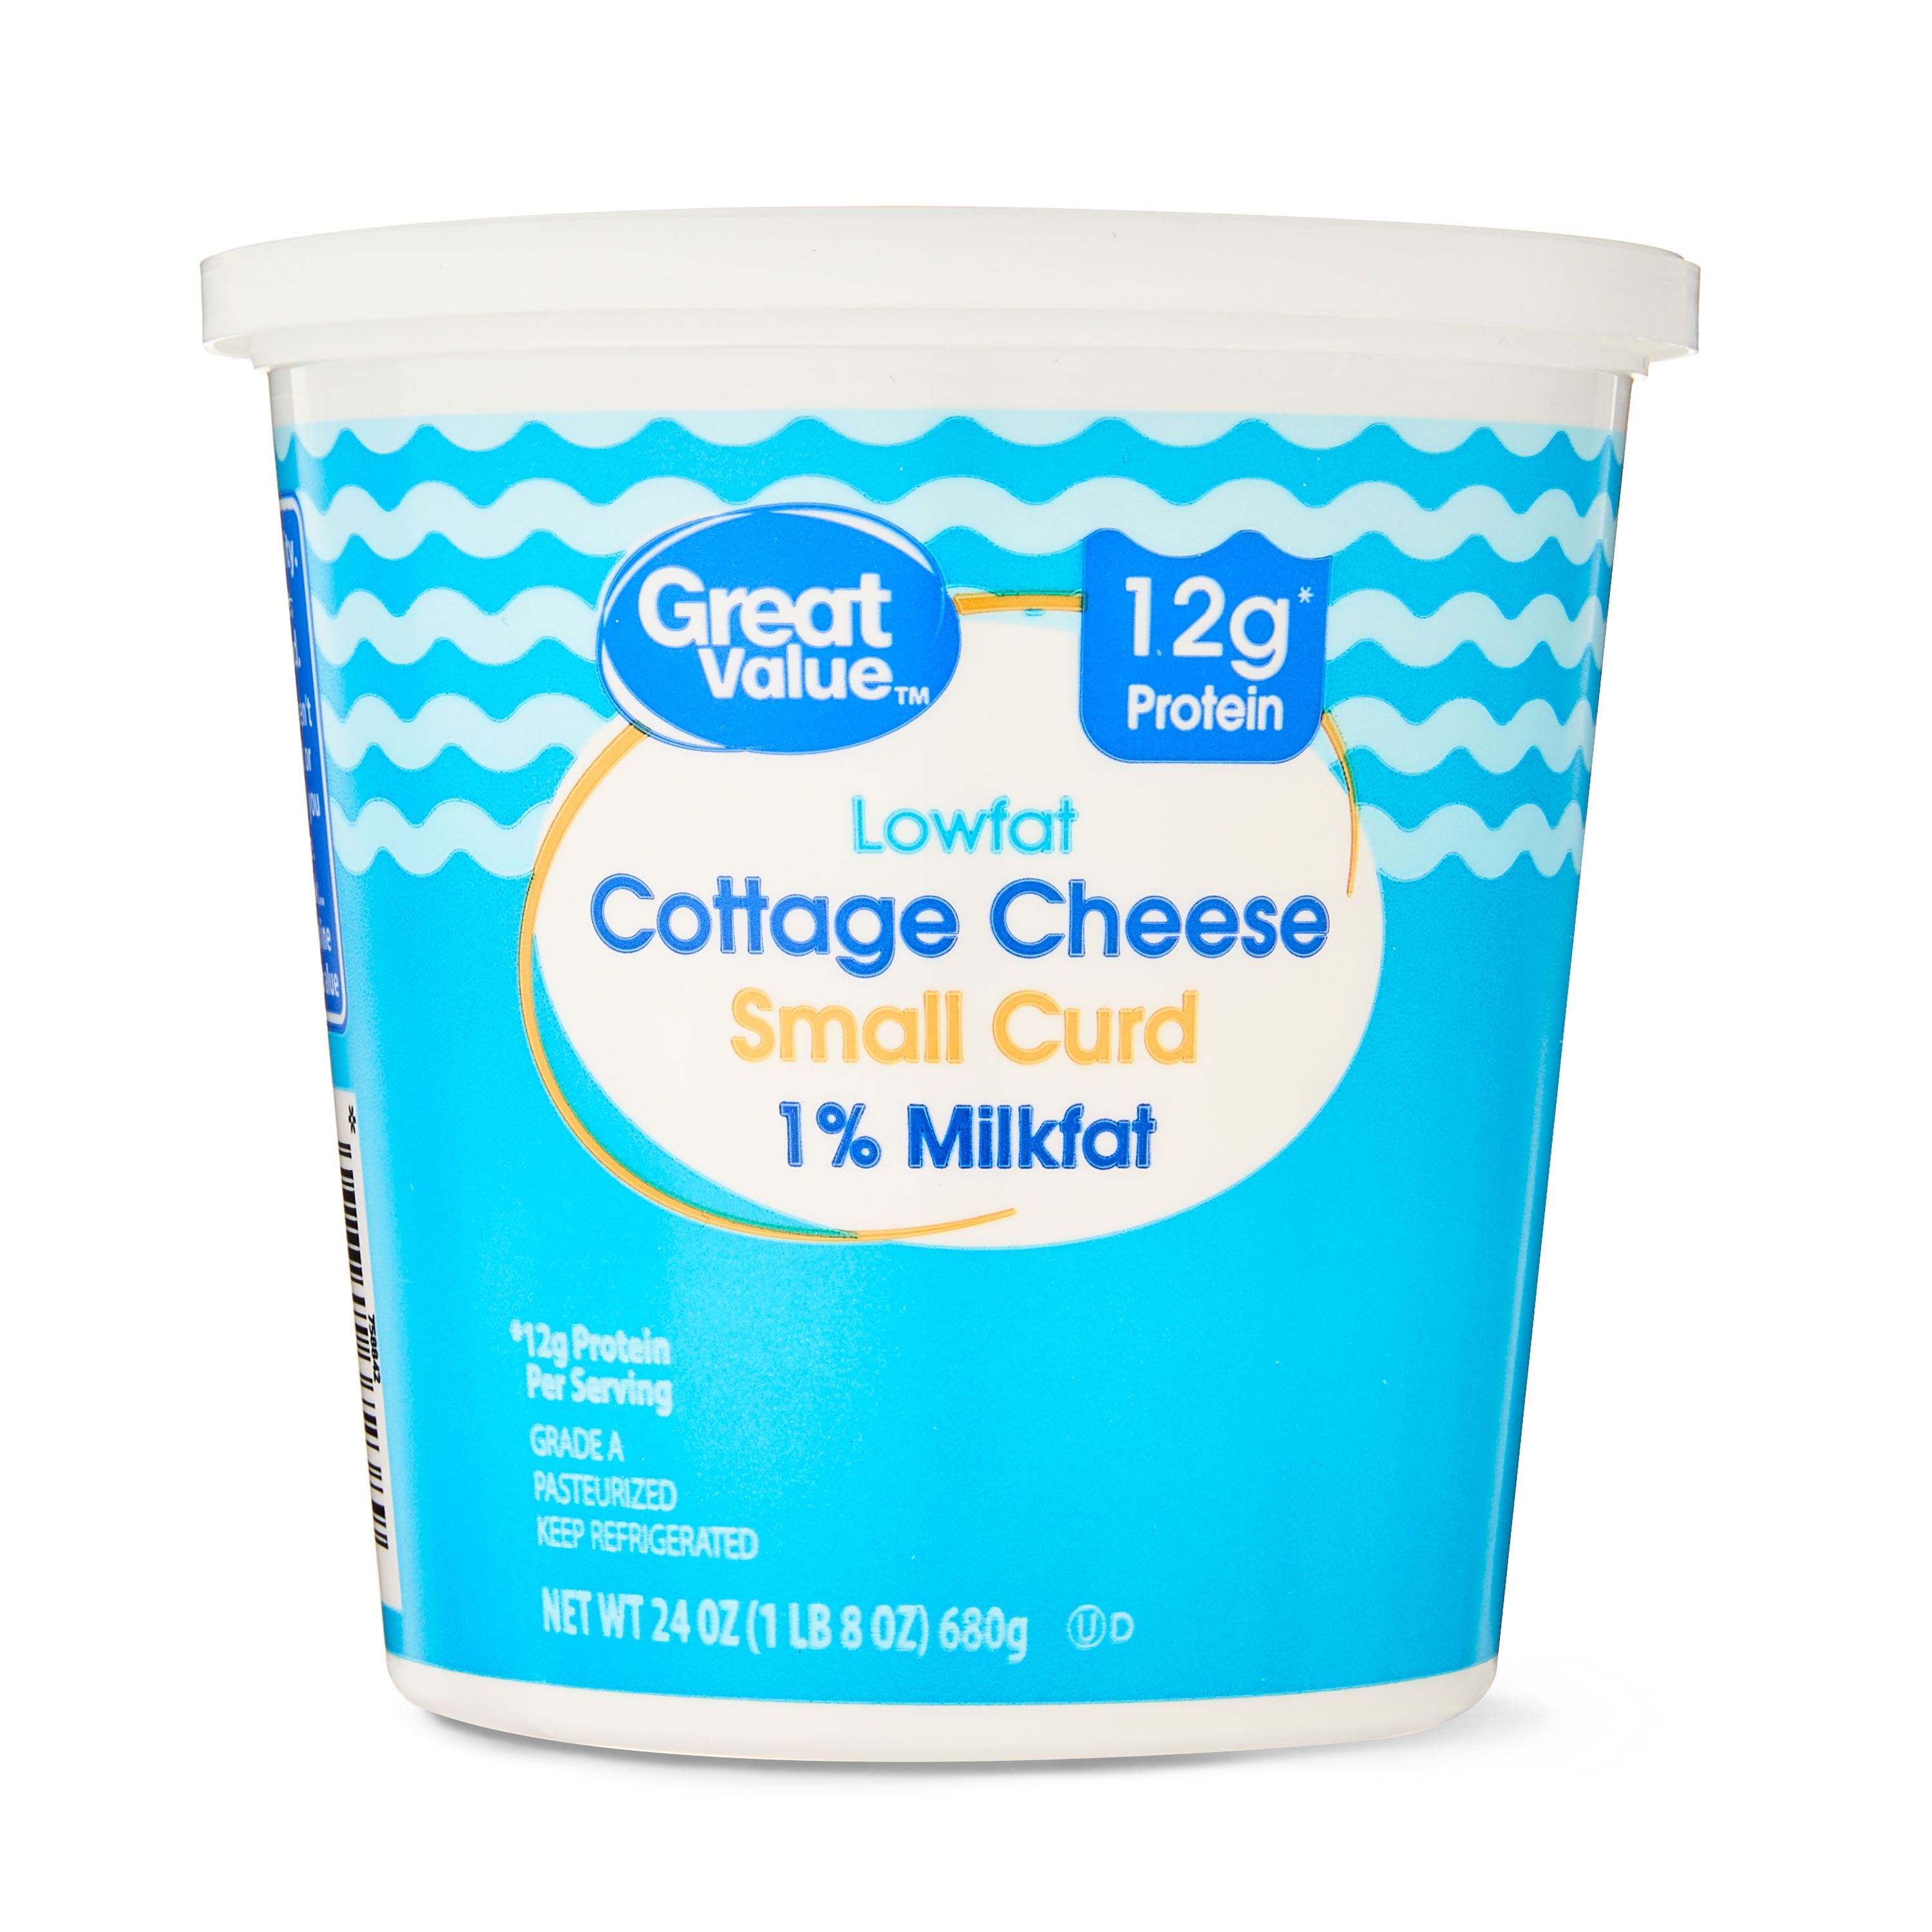 Great Value 1% Milkfat Lowfat Small Curd Cottage Cheese, 24 oz Tub